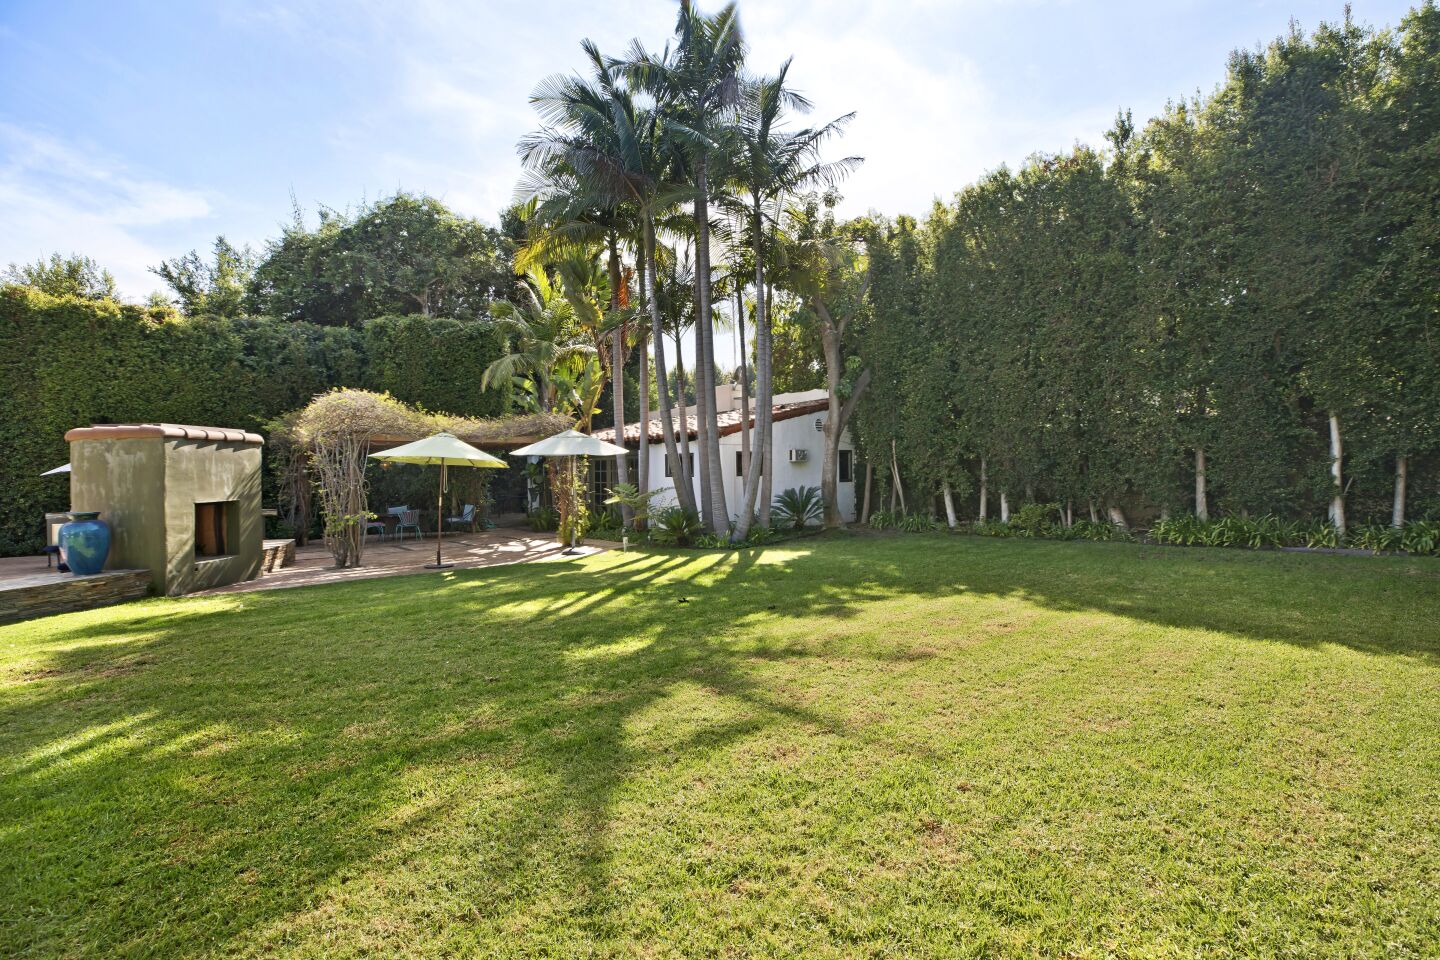 William Powell's onetime estate in Beverly Hills